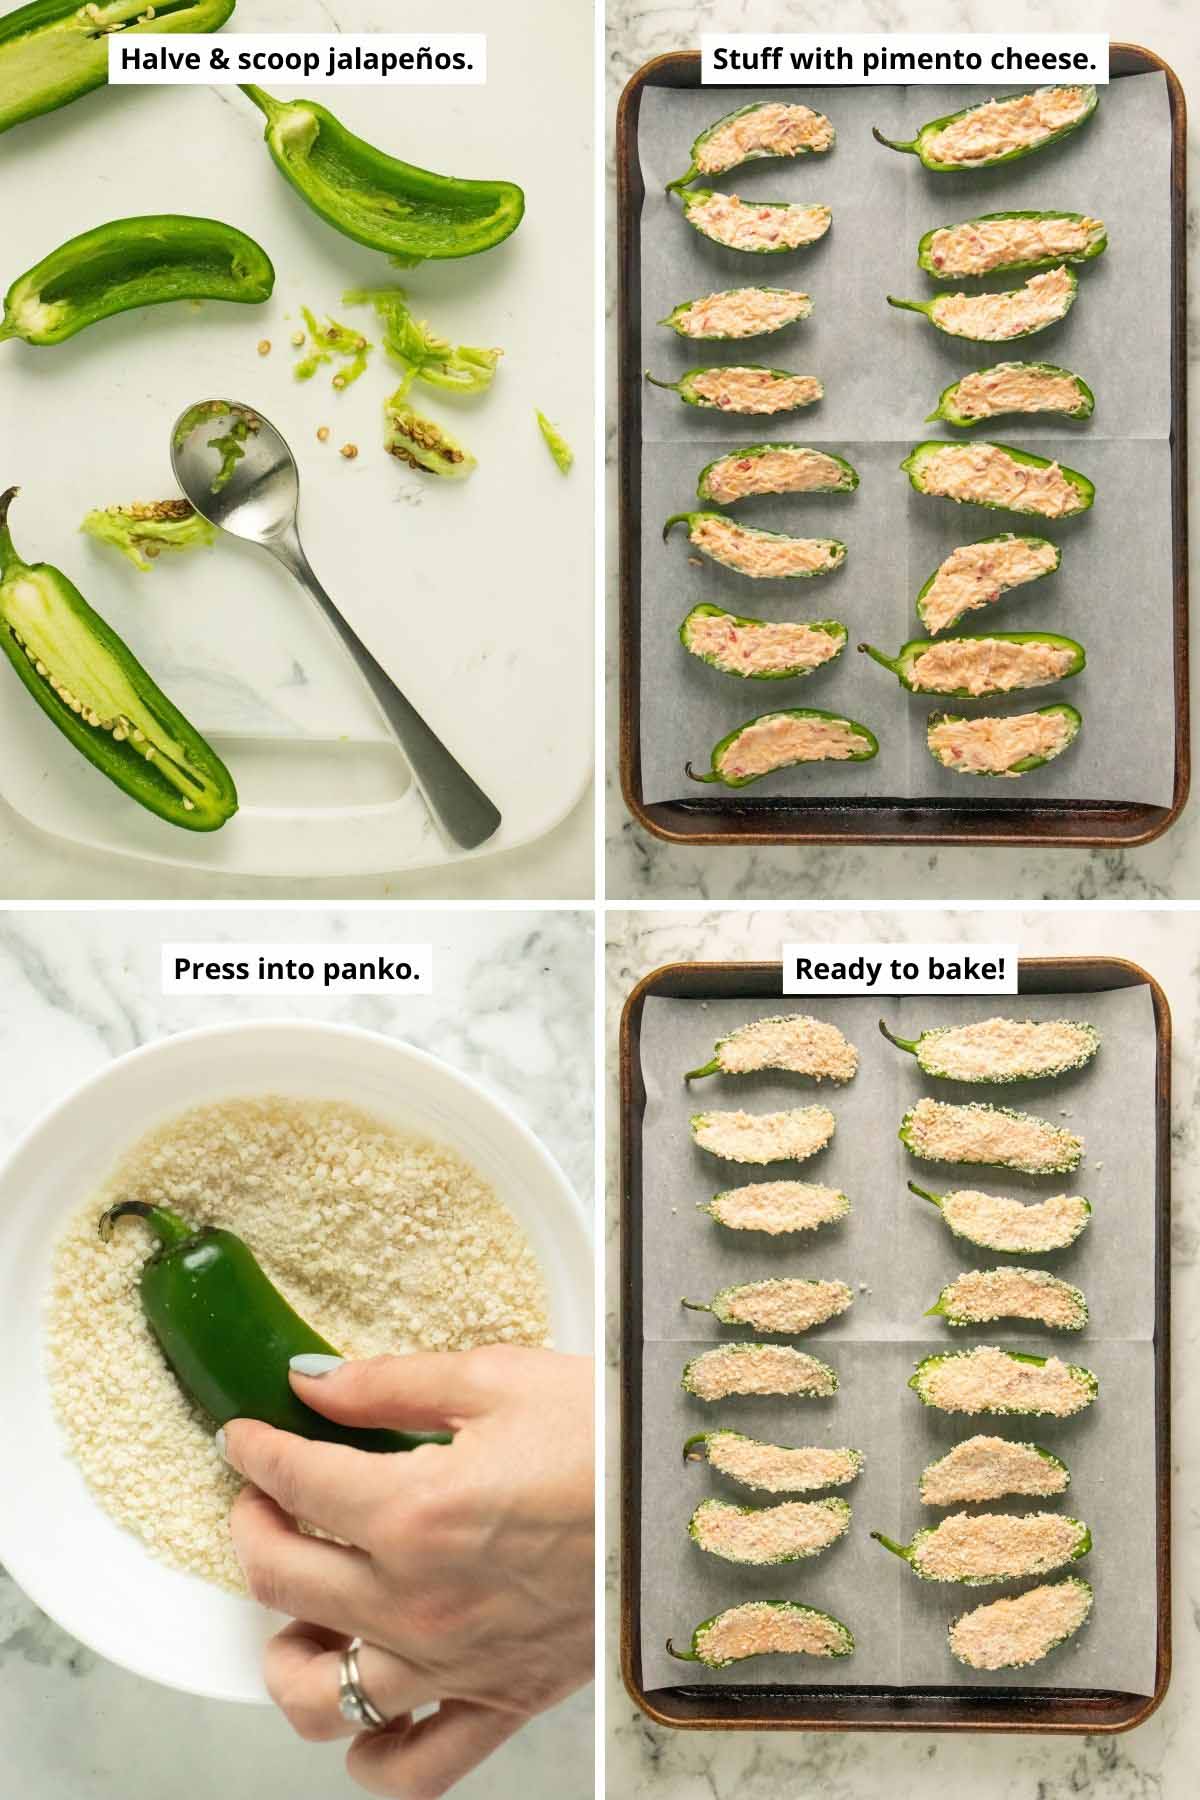 image collage of halving and scooping the jalapeños, the jalapeños stuffed, dipping the vegan stuffed jalapeños in panko, and the stuffed jalapeños ready to bake